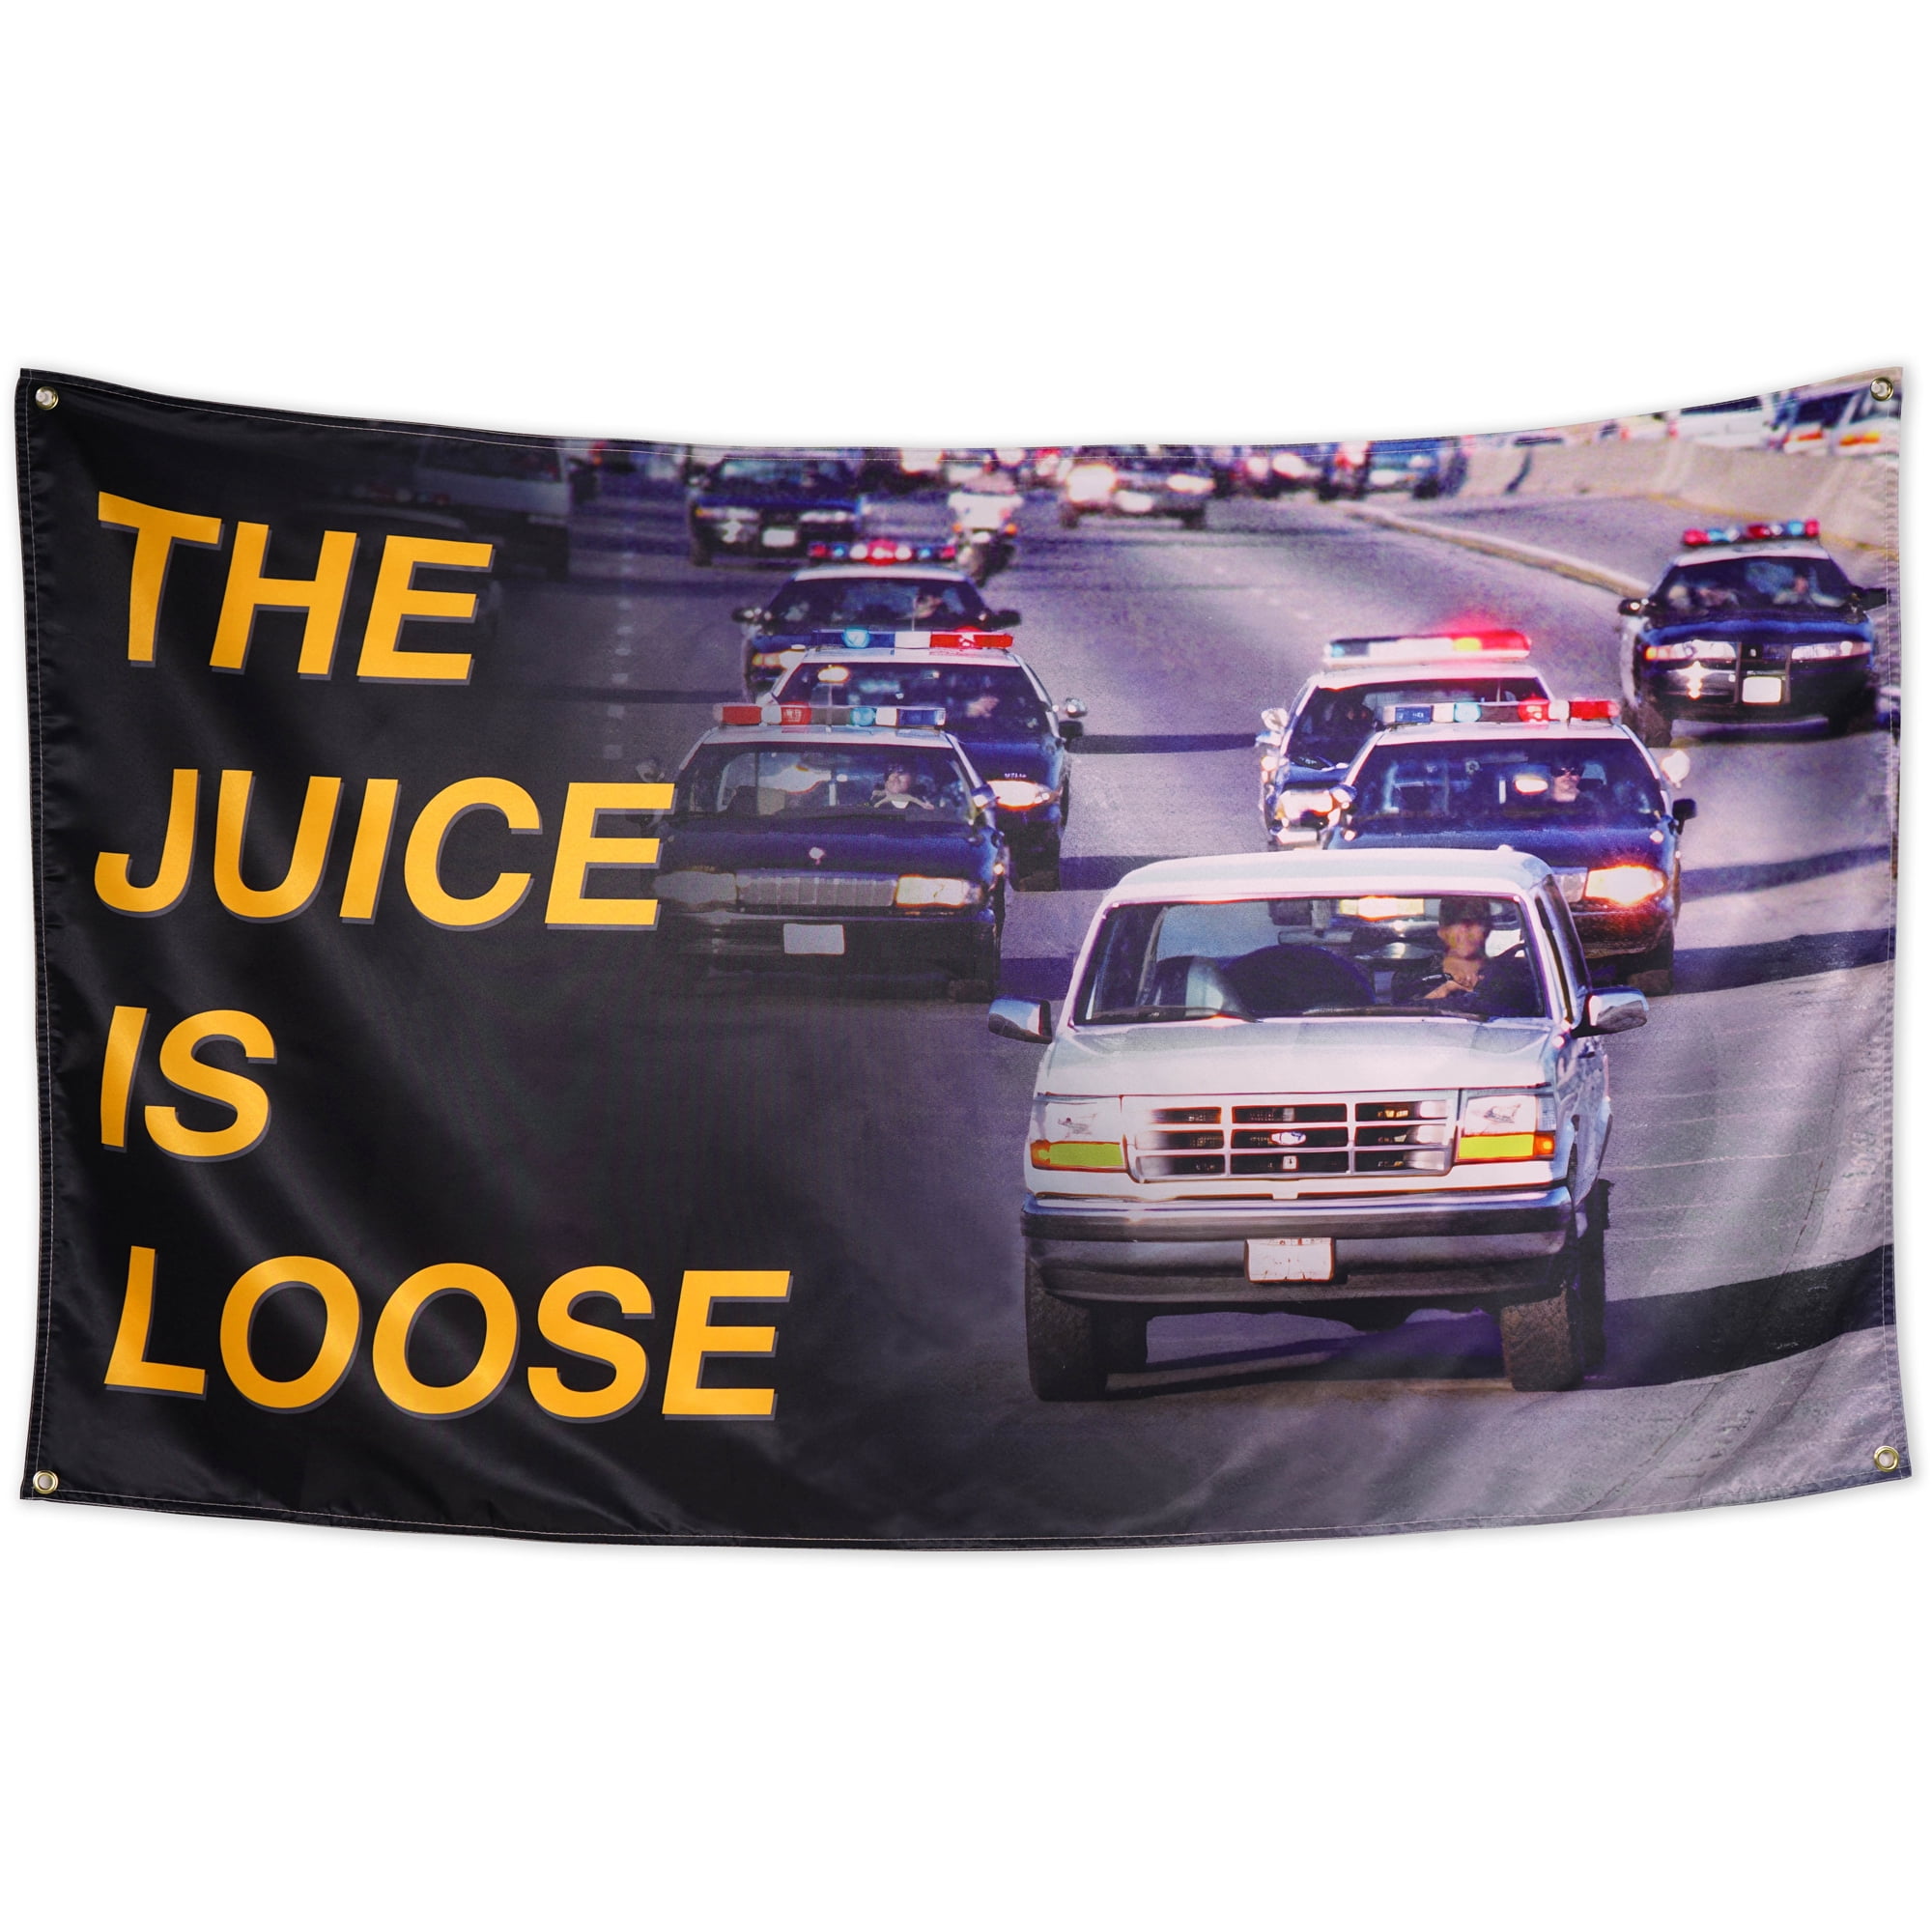 Details about   The Juice is Loose 3x5ft Flag Banner College Dorm Room Frat Gift Sign FREE SHIPP 